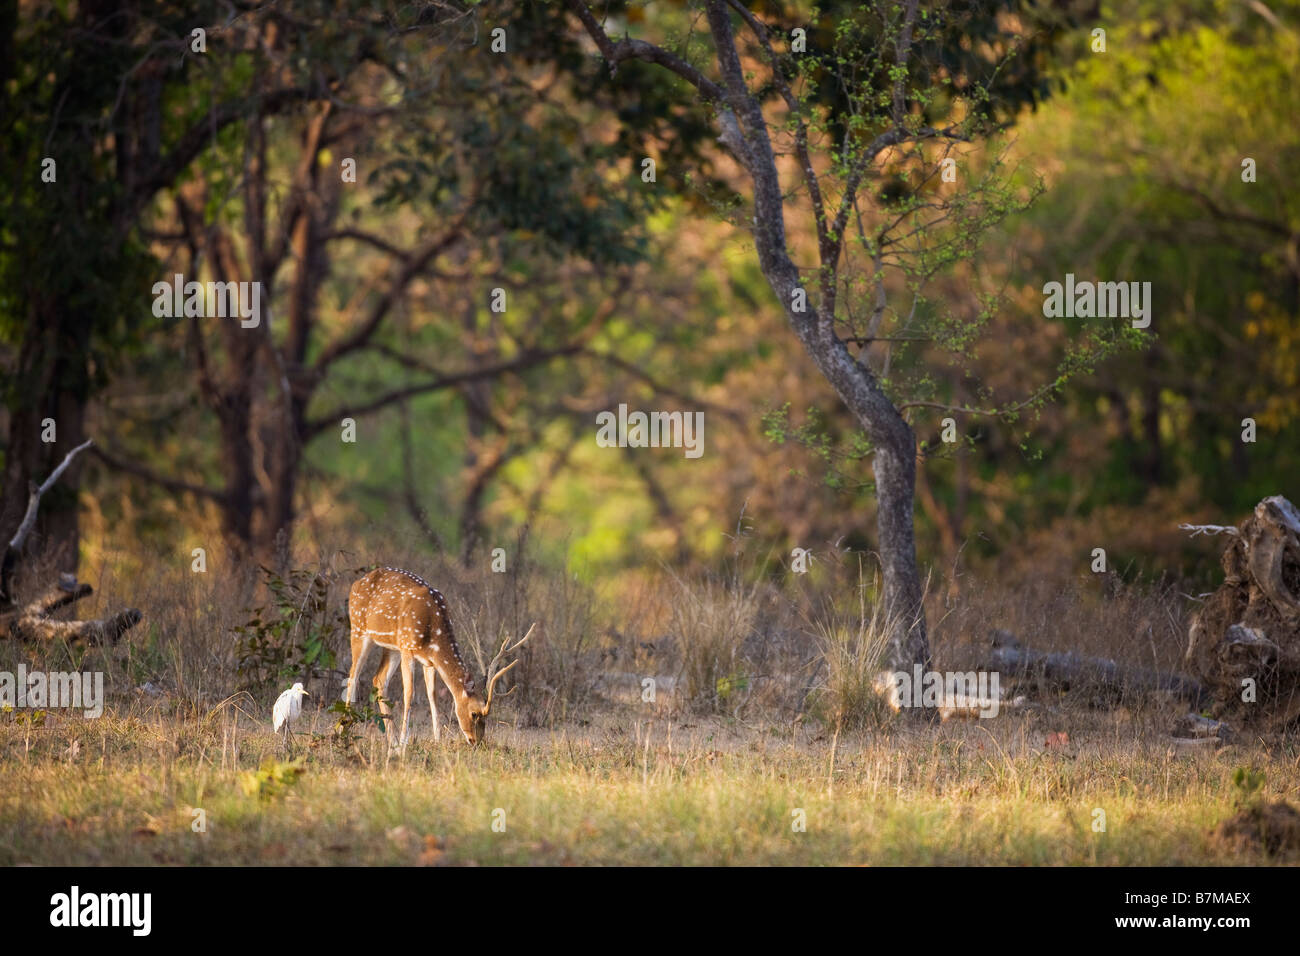 Spotted deer Chital Axis Axis male morning sun sunshine forest Kanha National Park Madhya Pradesh Northern India Asia Stock Photo